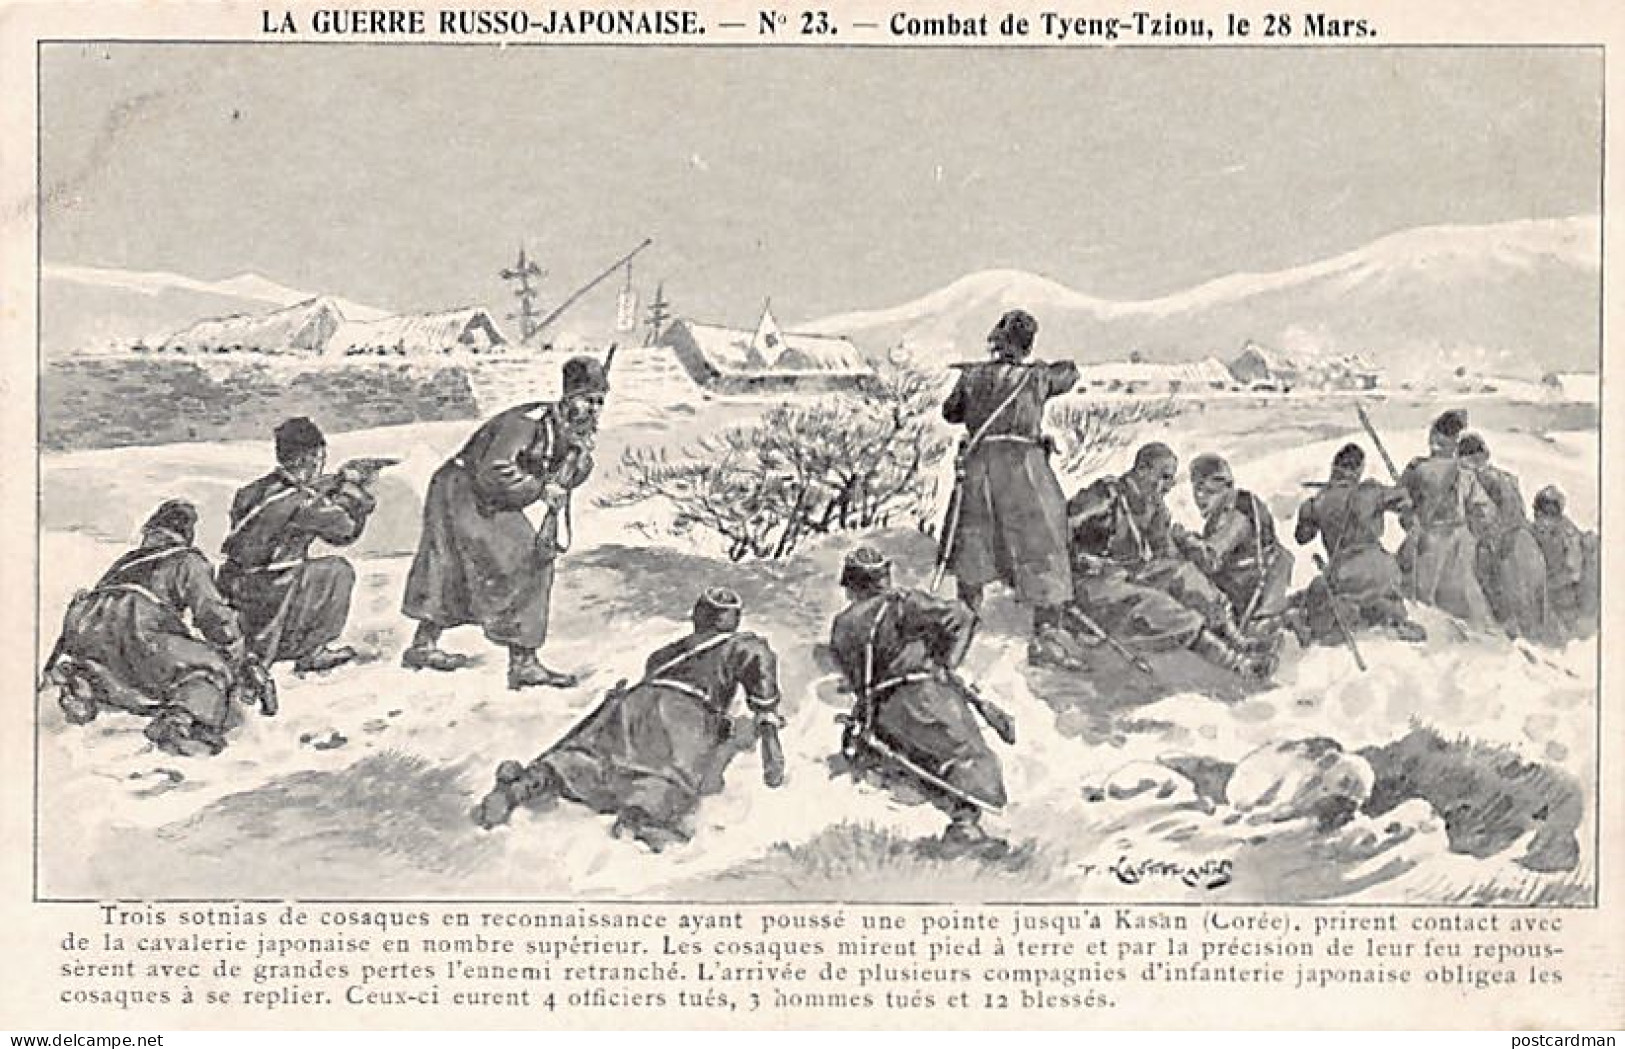 Korea - RUSSO JAPANESE WAR - Russian Cossacks Repelling A Border Attack On March 28, 1904 - Korea (Nord)